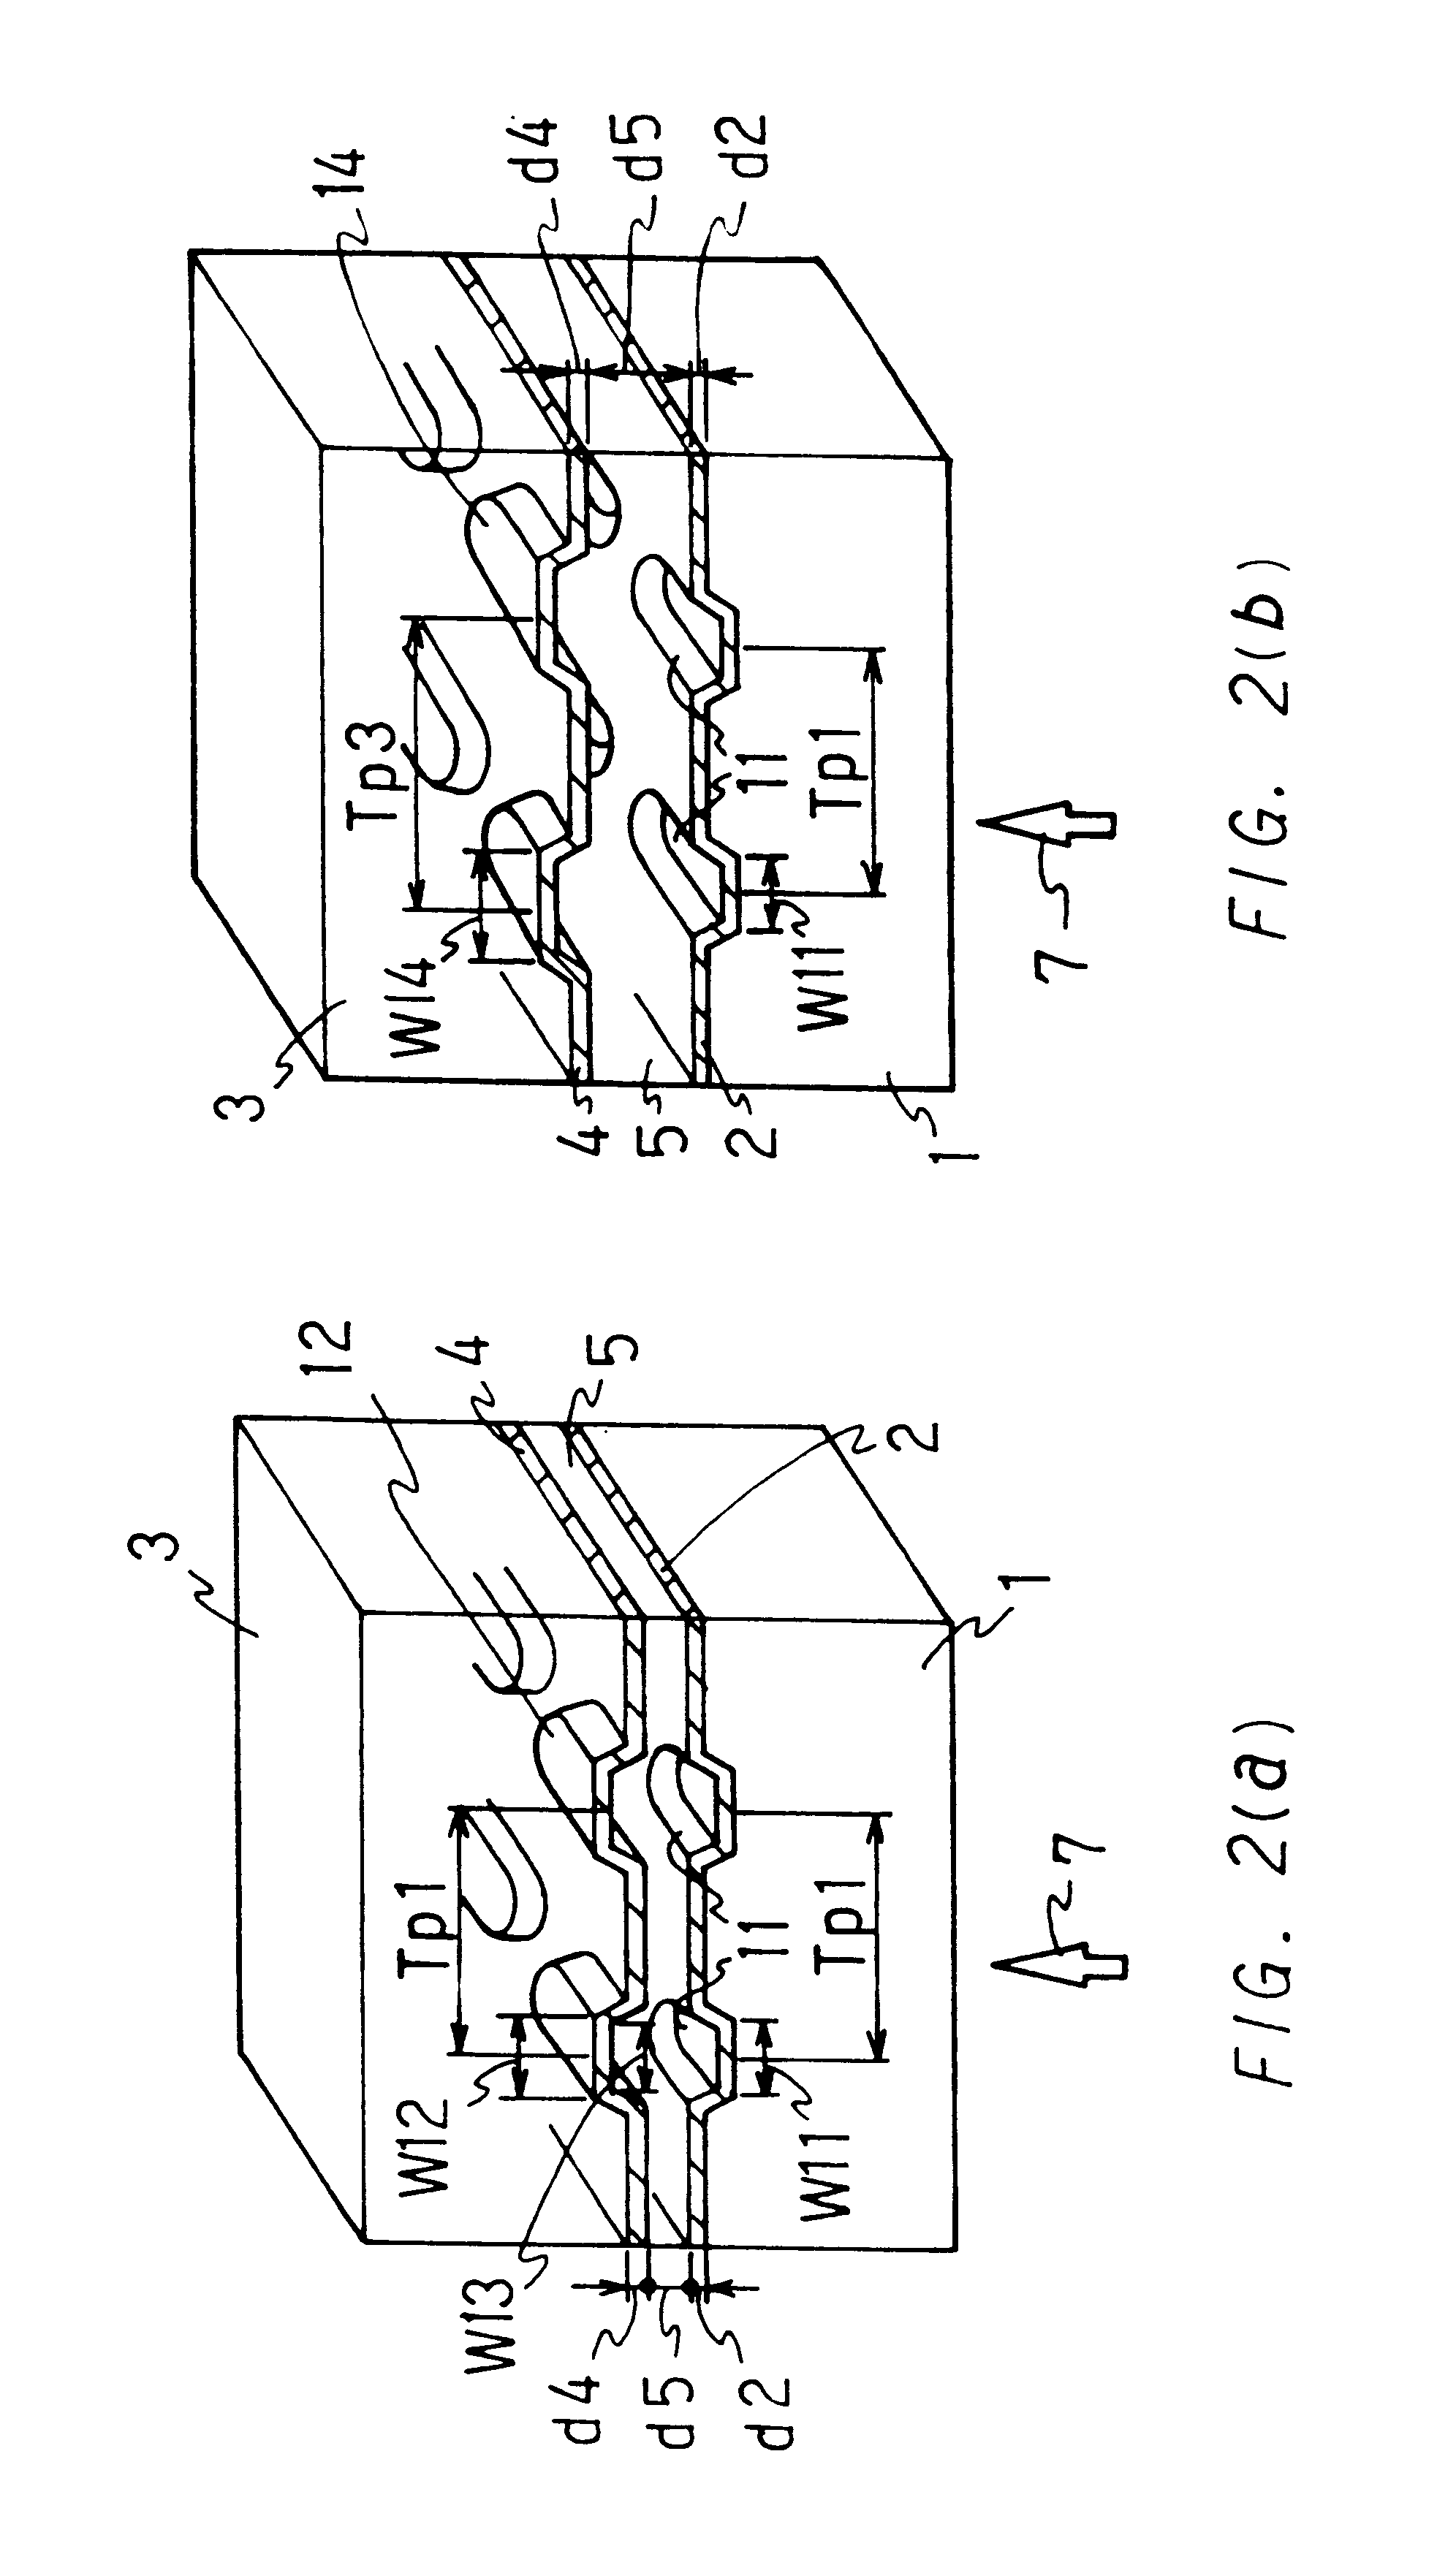 Optical information recording and reproducing apparatus for multiple layer recording medium